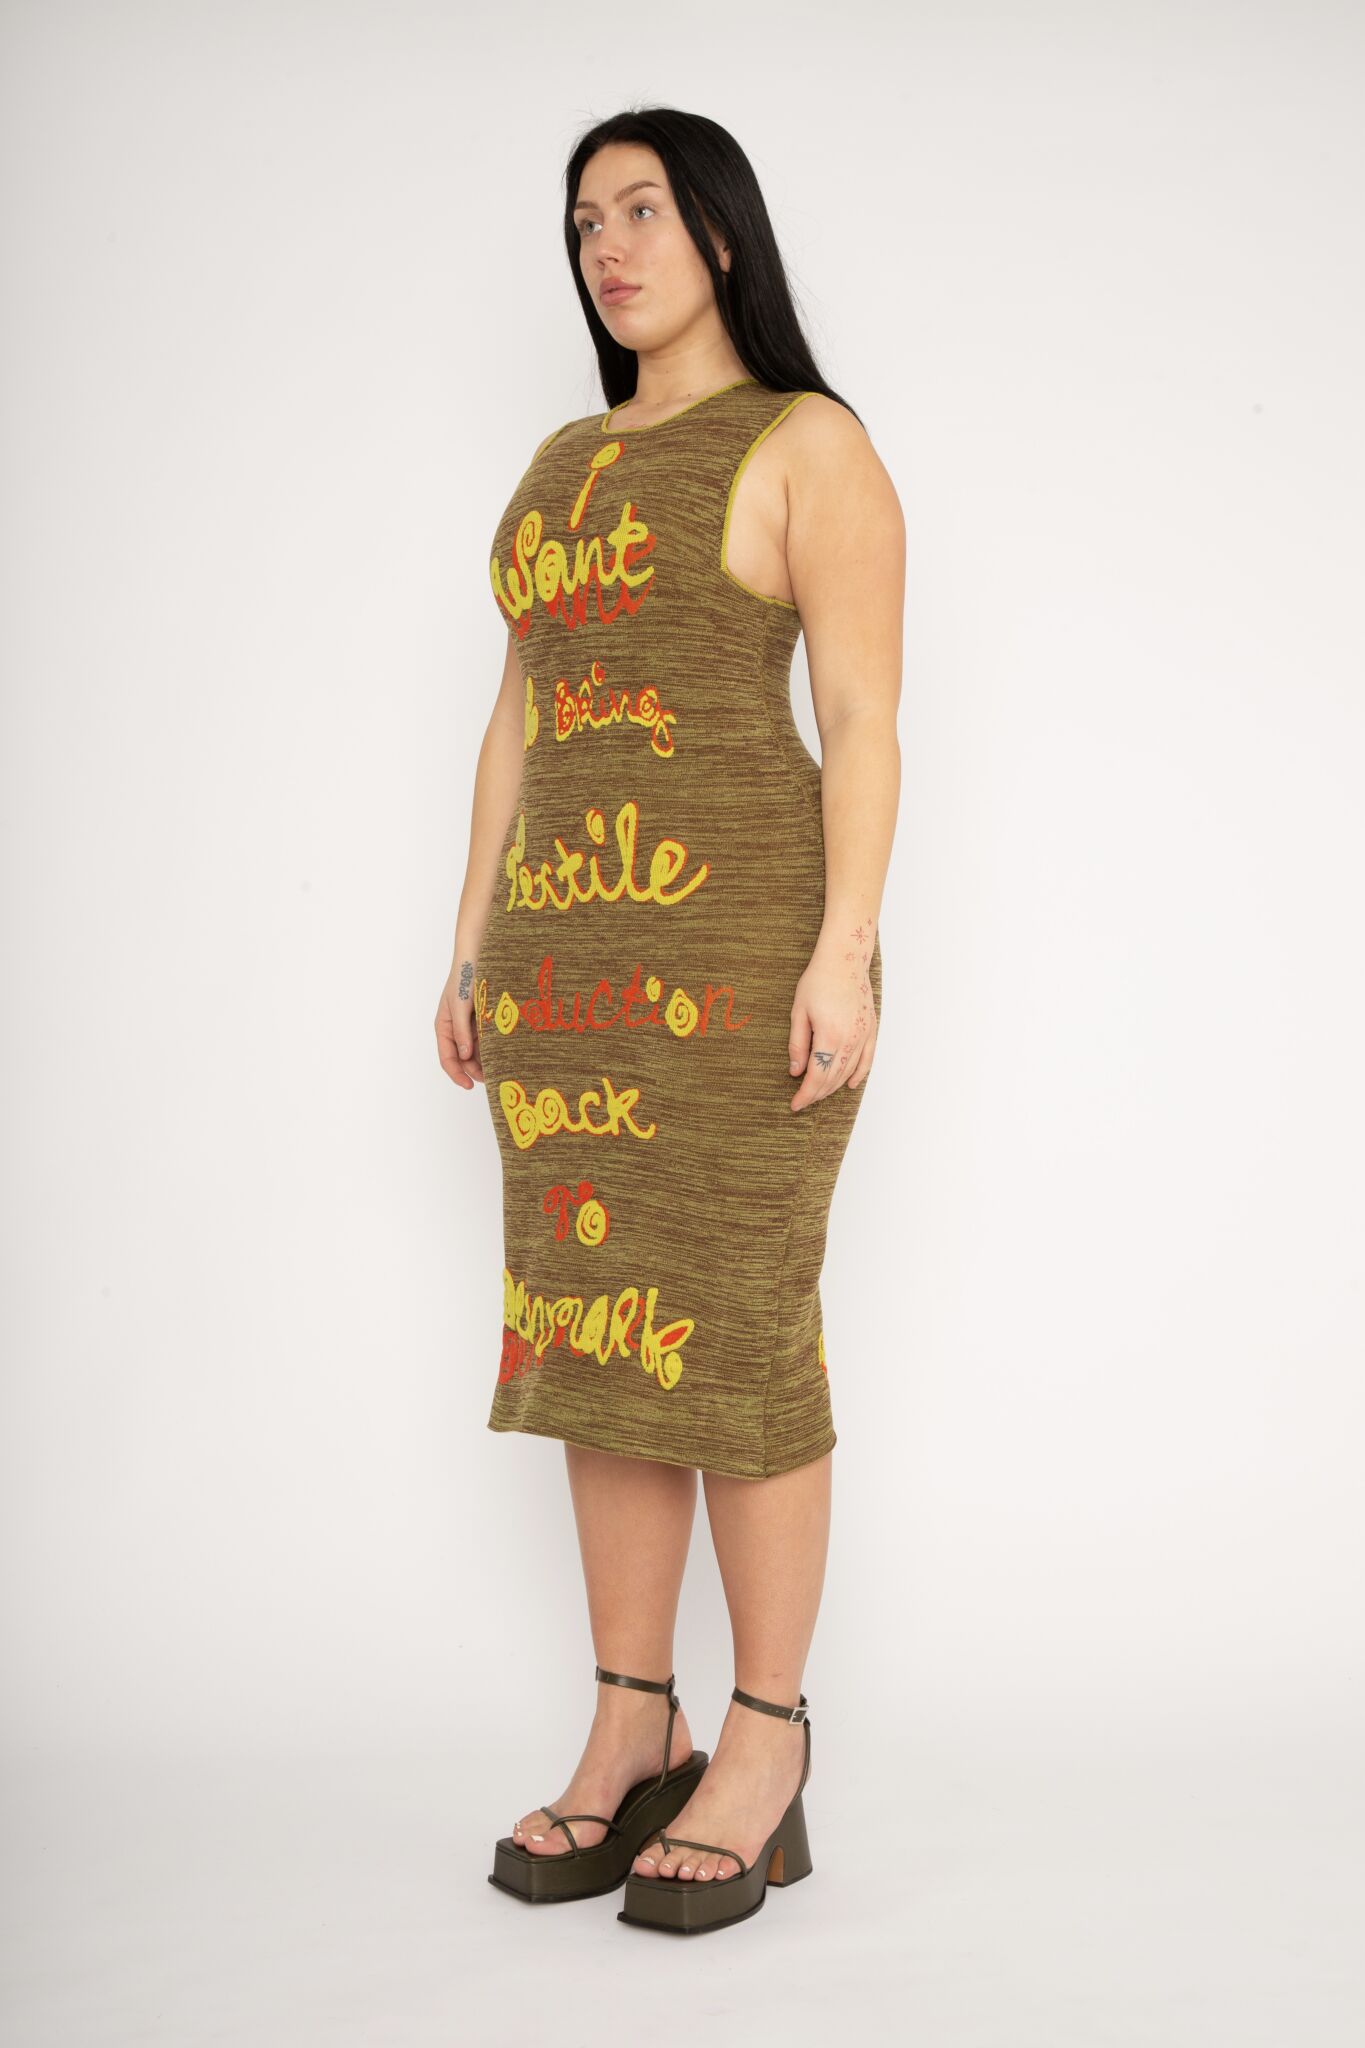 My Mission Dress in brown and yellow is a body fitted knitted jacquard dress in melange decorated with 3D statement artwork in bold colours. The dress is cut for a slim fit and has a slight shaping effect. A zipper has been added to make it easier to slide into. The merino wool makes the textile soft, and the nylon very flexible, meaning the dress adapts to the body wearing it. The My Mission Dress is a tribute to our core values and production methods, with the text in the front stating ”I want to bring textile production back to Denmark” and the back ”I simply don’t believe in mass production”. Available in 3 different colours and sizes.